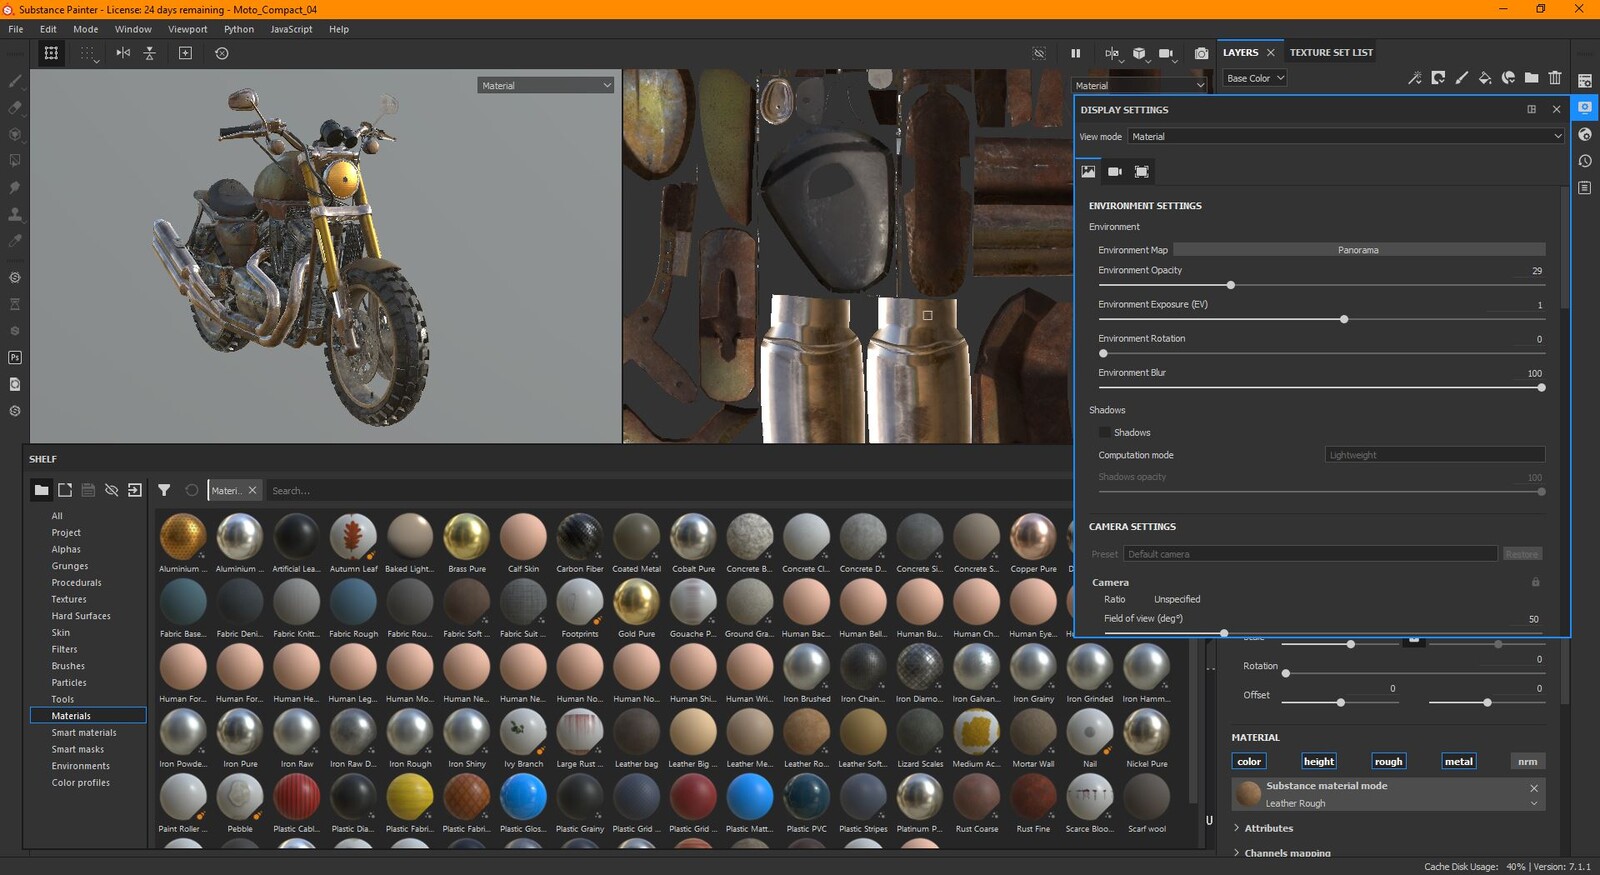 Re-texturing the bike in Substance Painter. PS: I still haven't come to grips with the not-that-new way of managing UDIMs. I always use the legacy texture sets.